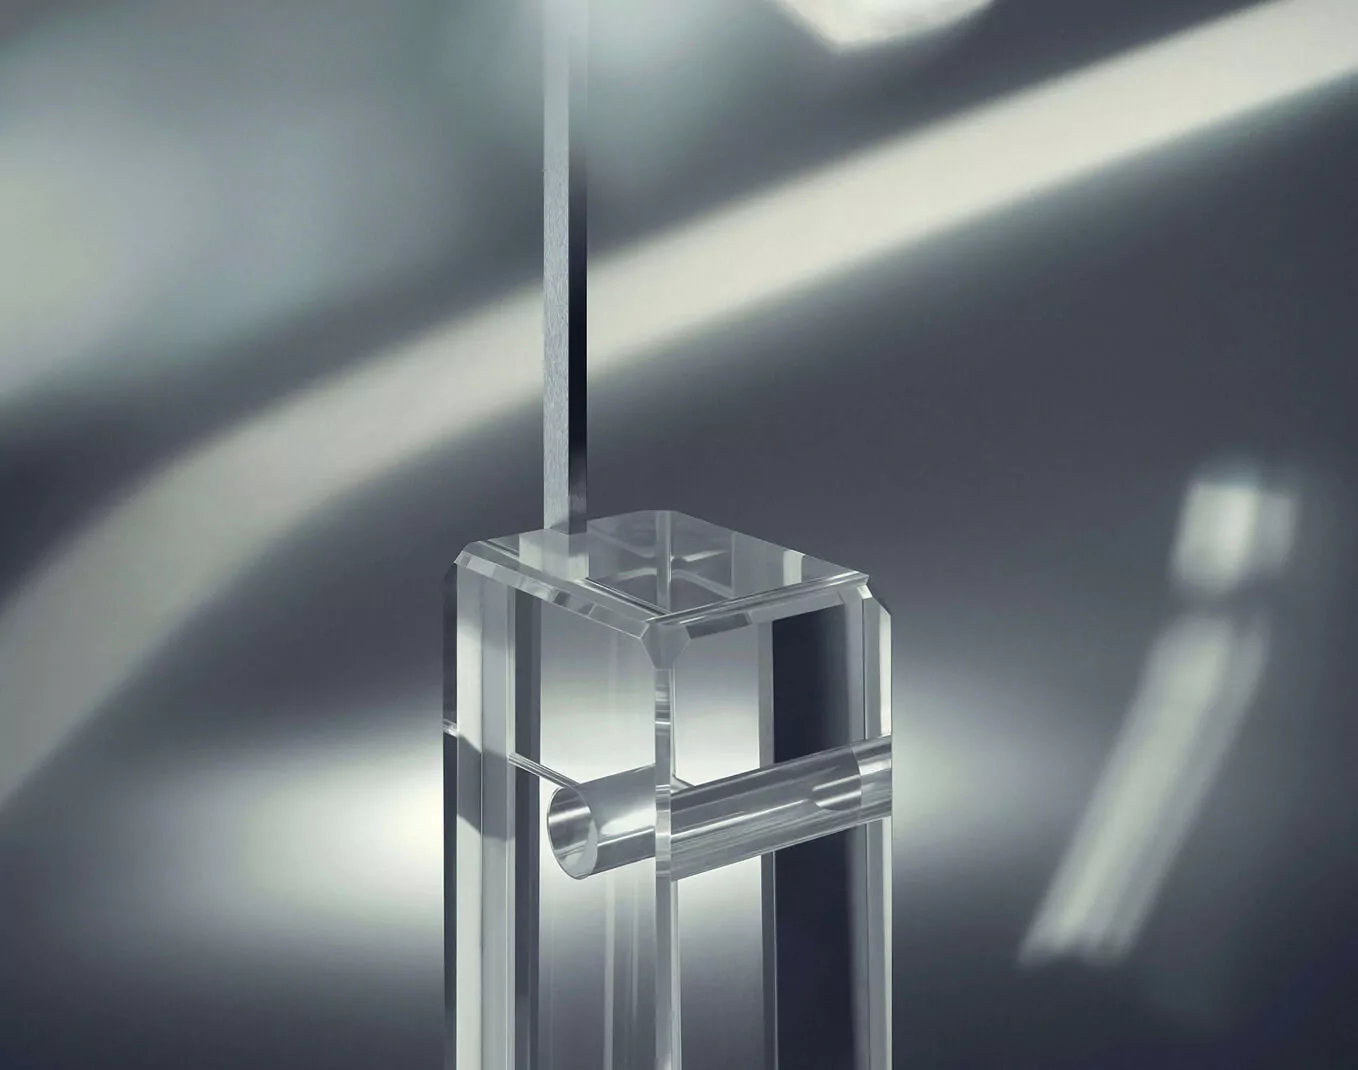 3 1 The Arco K 2022 Limited Edition introduces a novel process, unavailable six decades ago, that illuminates the lamp’s inner structure, guiding the observer’s attention along the crucial arc towards the innovative crystal block. Aside from this enhancement, the cherished Arco lamp retains its timeless design.